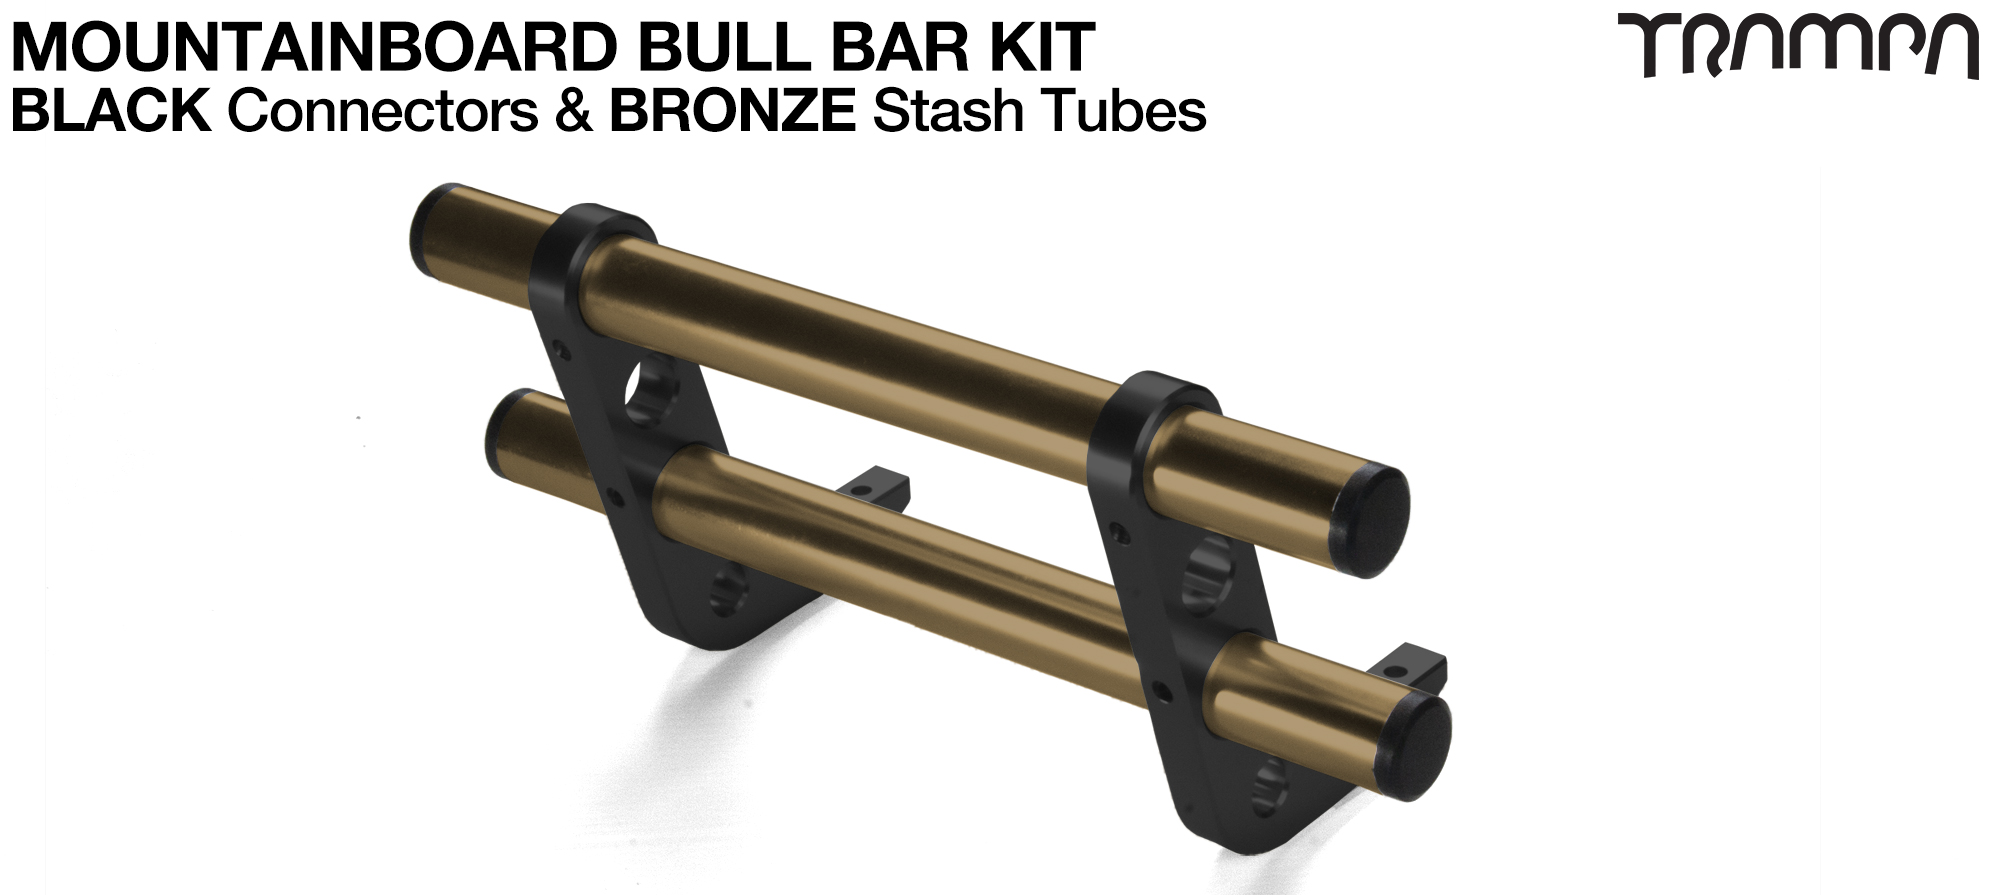 BLACK Uprights & BRONZE Crossbar BULL BARS for MOUNTAINBOARDS using T6 Heat Treated CNC'd AluminIum Clamps, Hollow Aluminium Stash Tubes with Rubber end bungs 